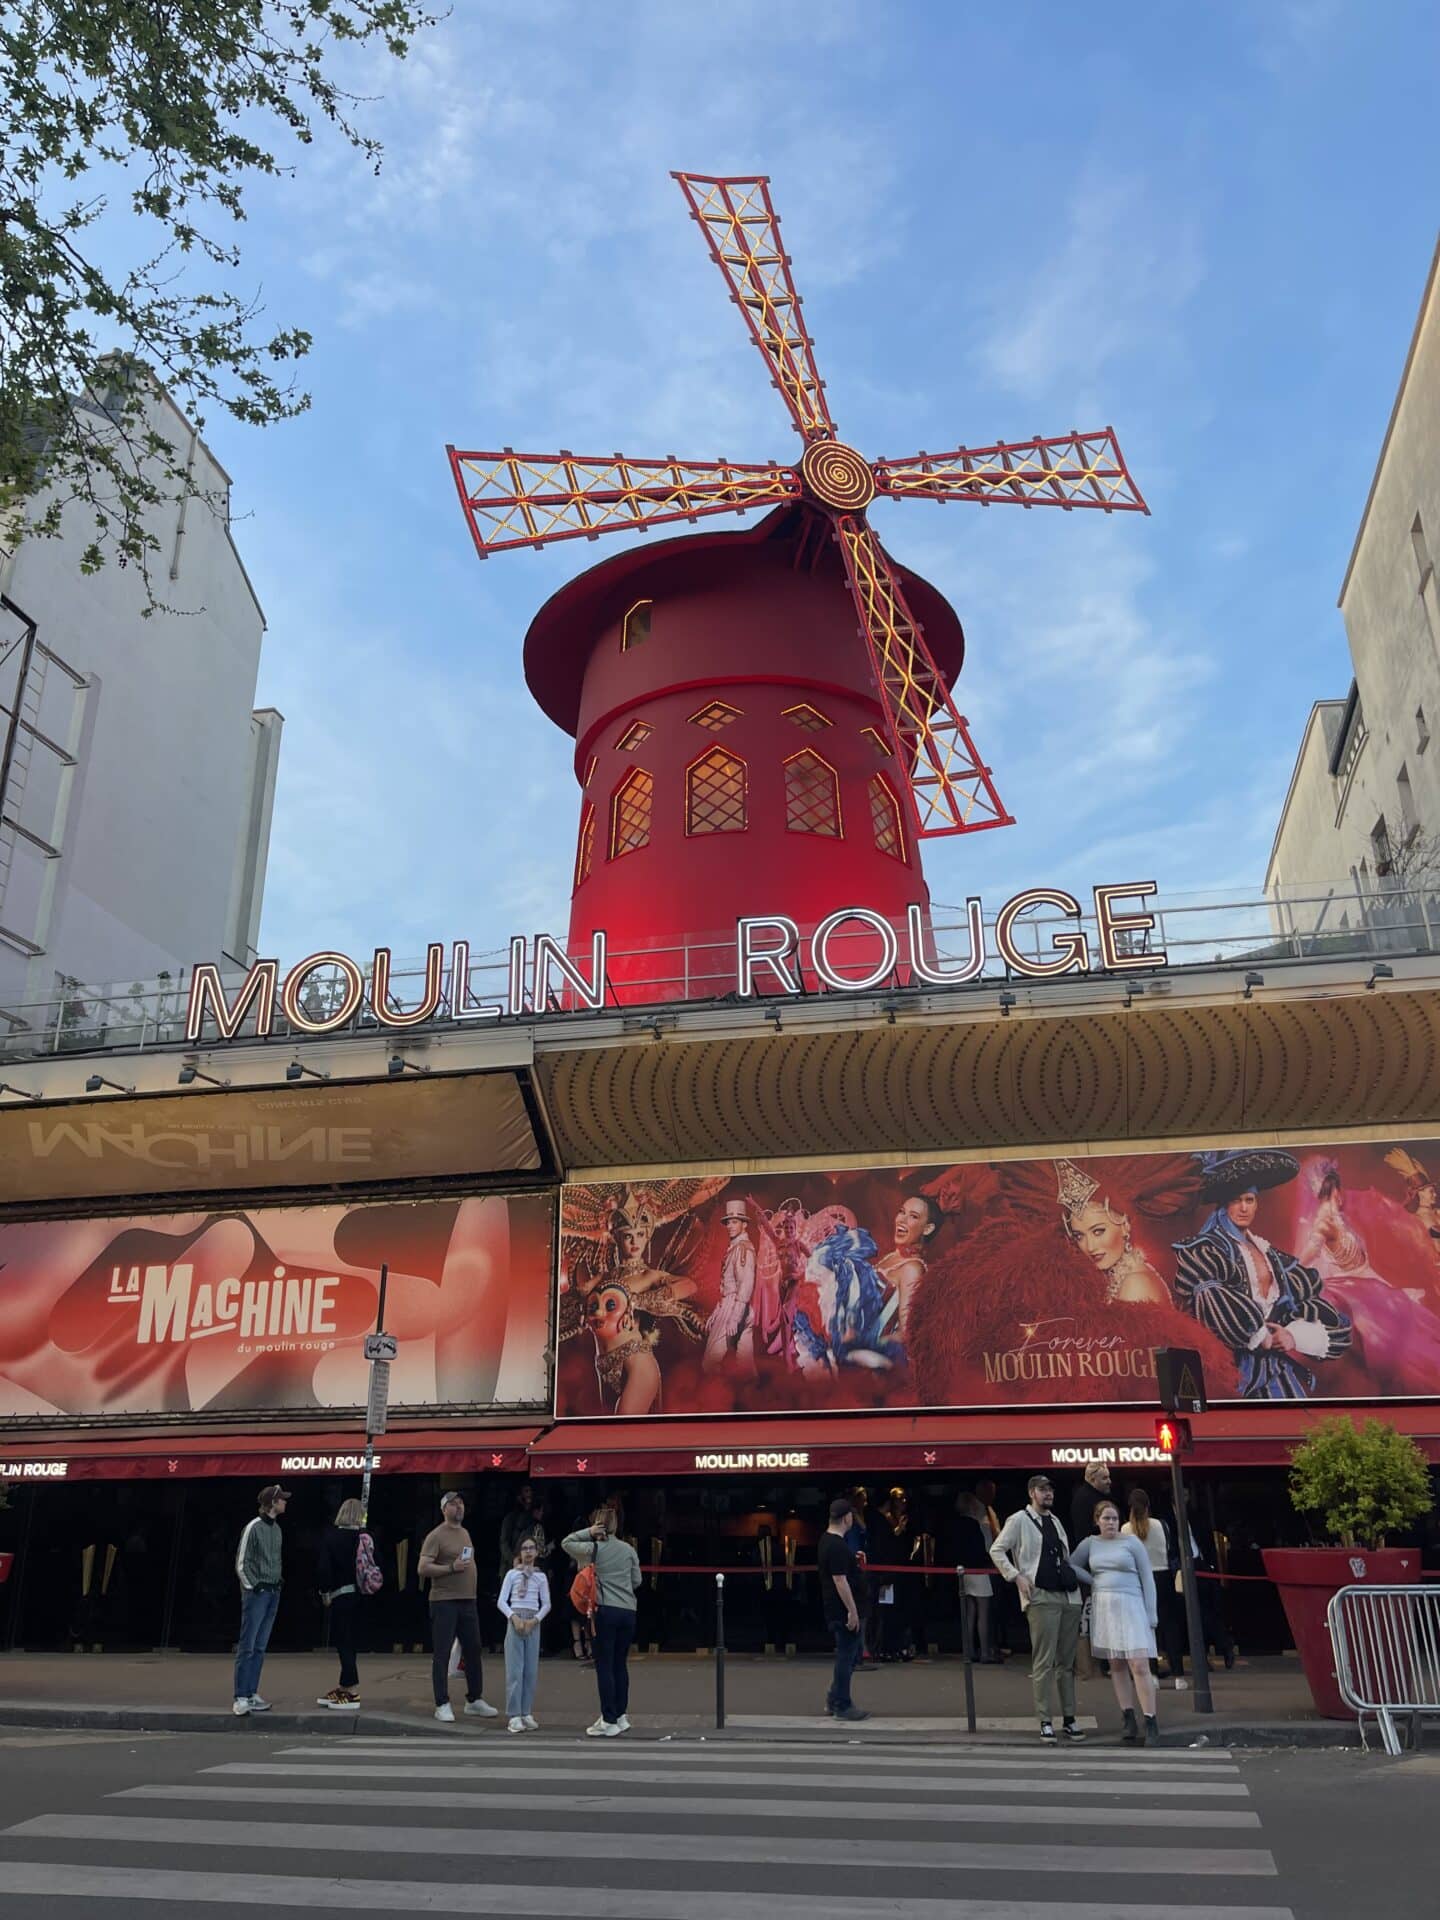 The exterior of the famous Moulin Rouge Theatre